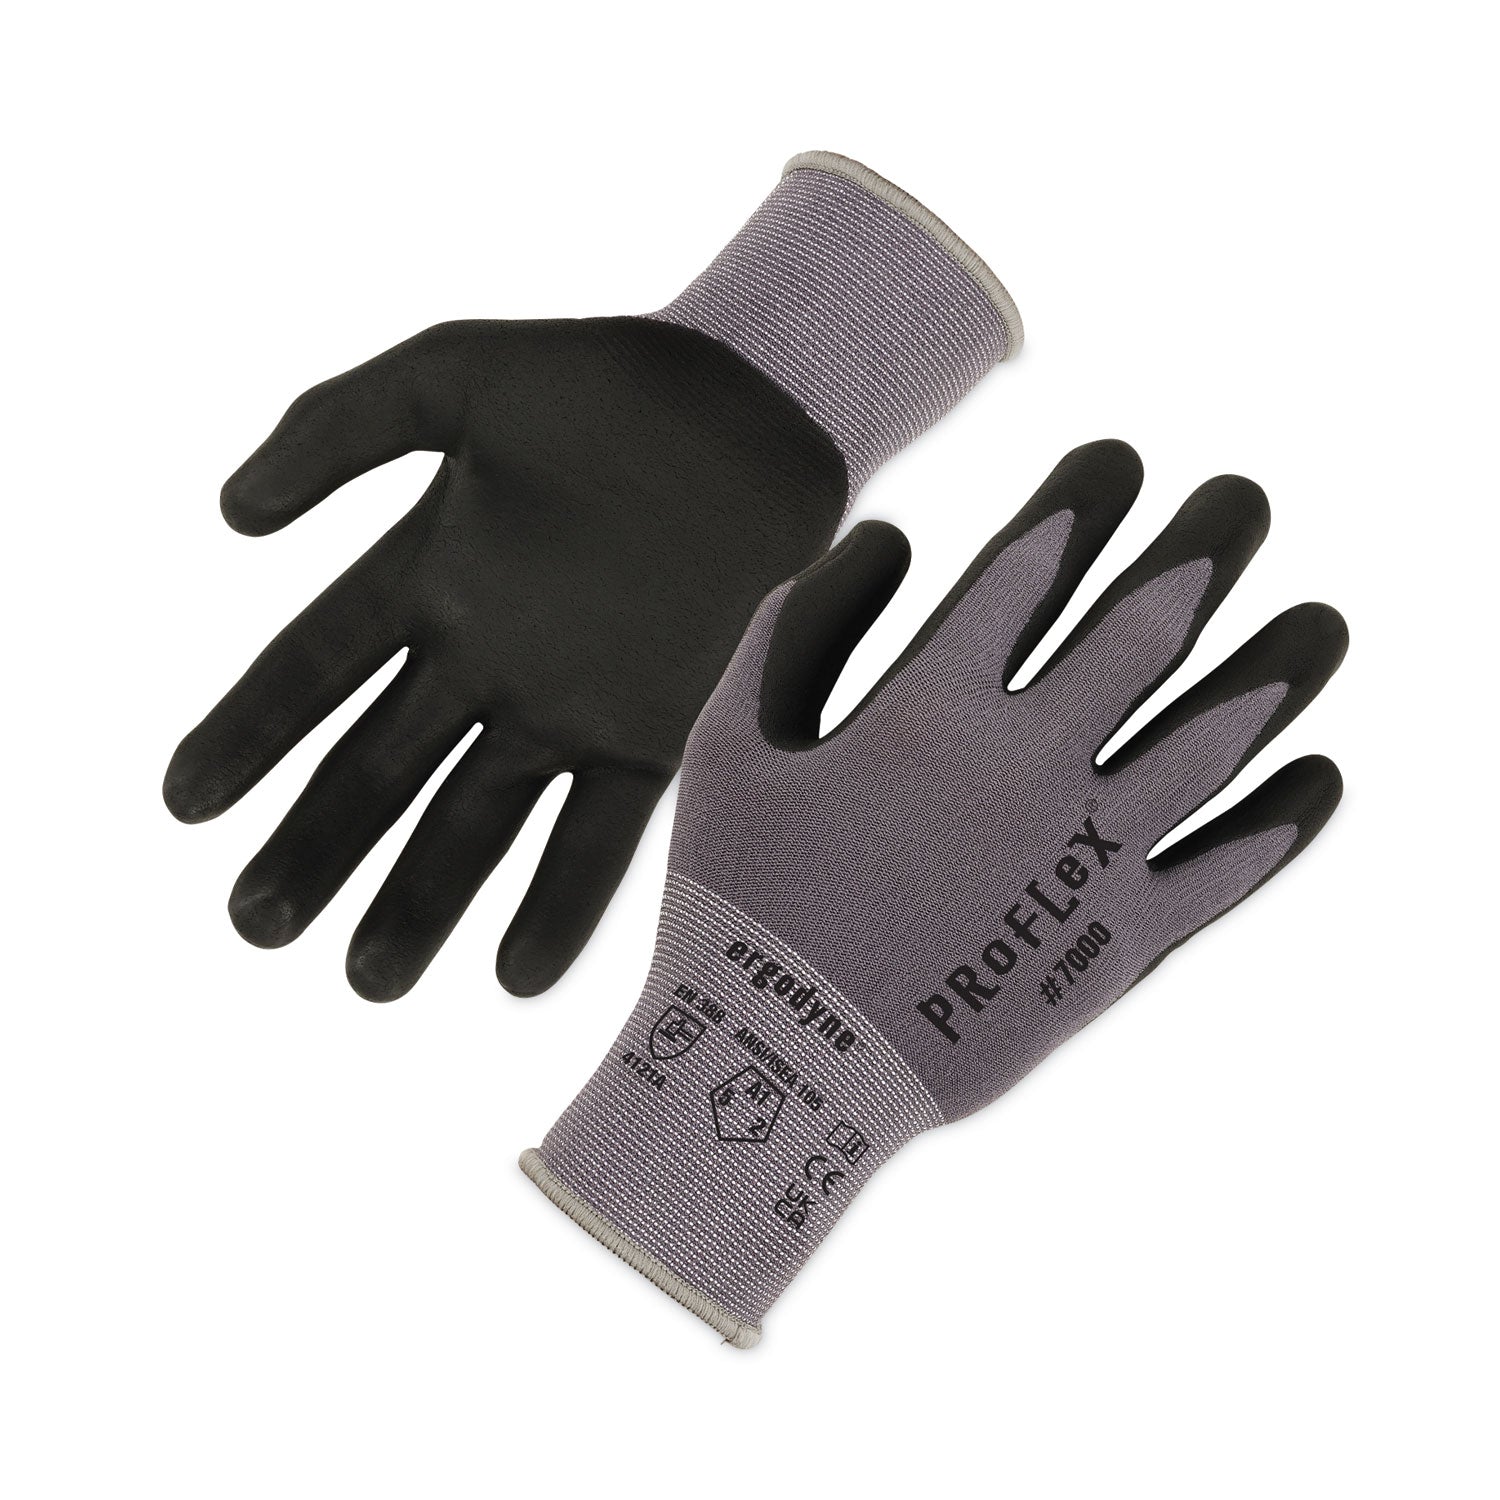 proflex-7000-nitrile-coated-gloves-microfoam-palm-gray-large-pair-ships-in-1-3-business-days_ego10374 - 1